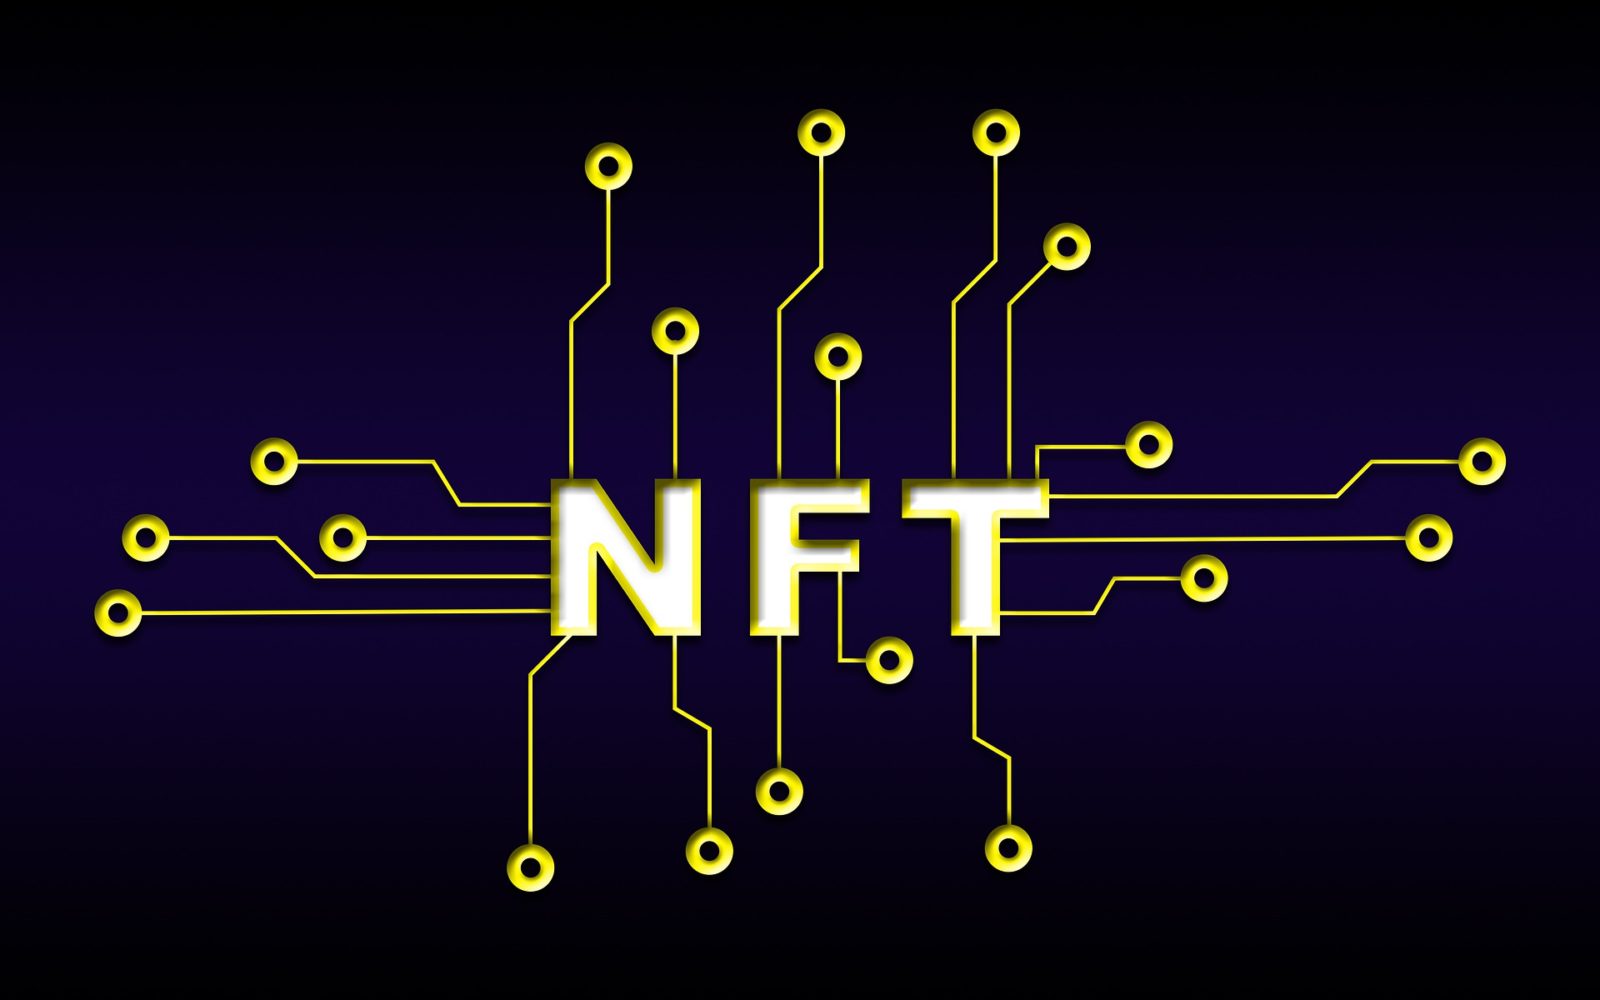 NFT special the future NFT 20 OpenSea under fire and